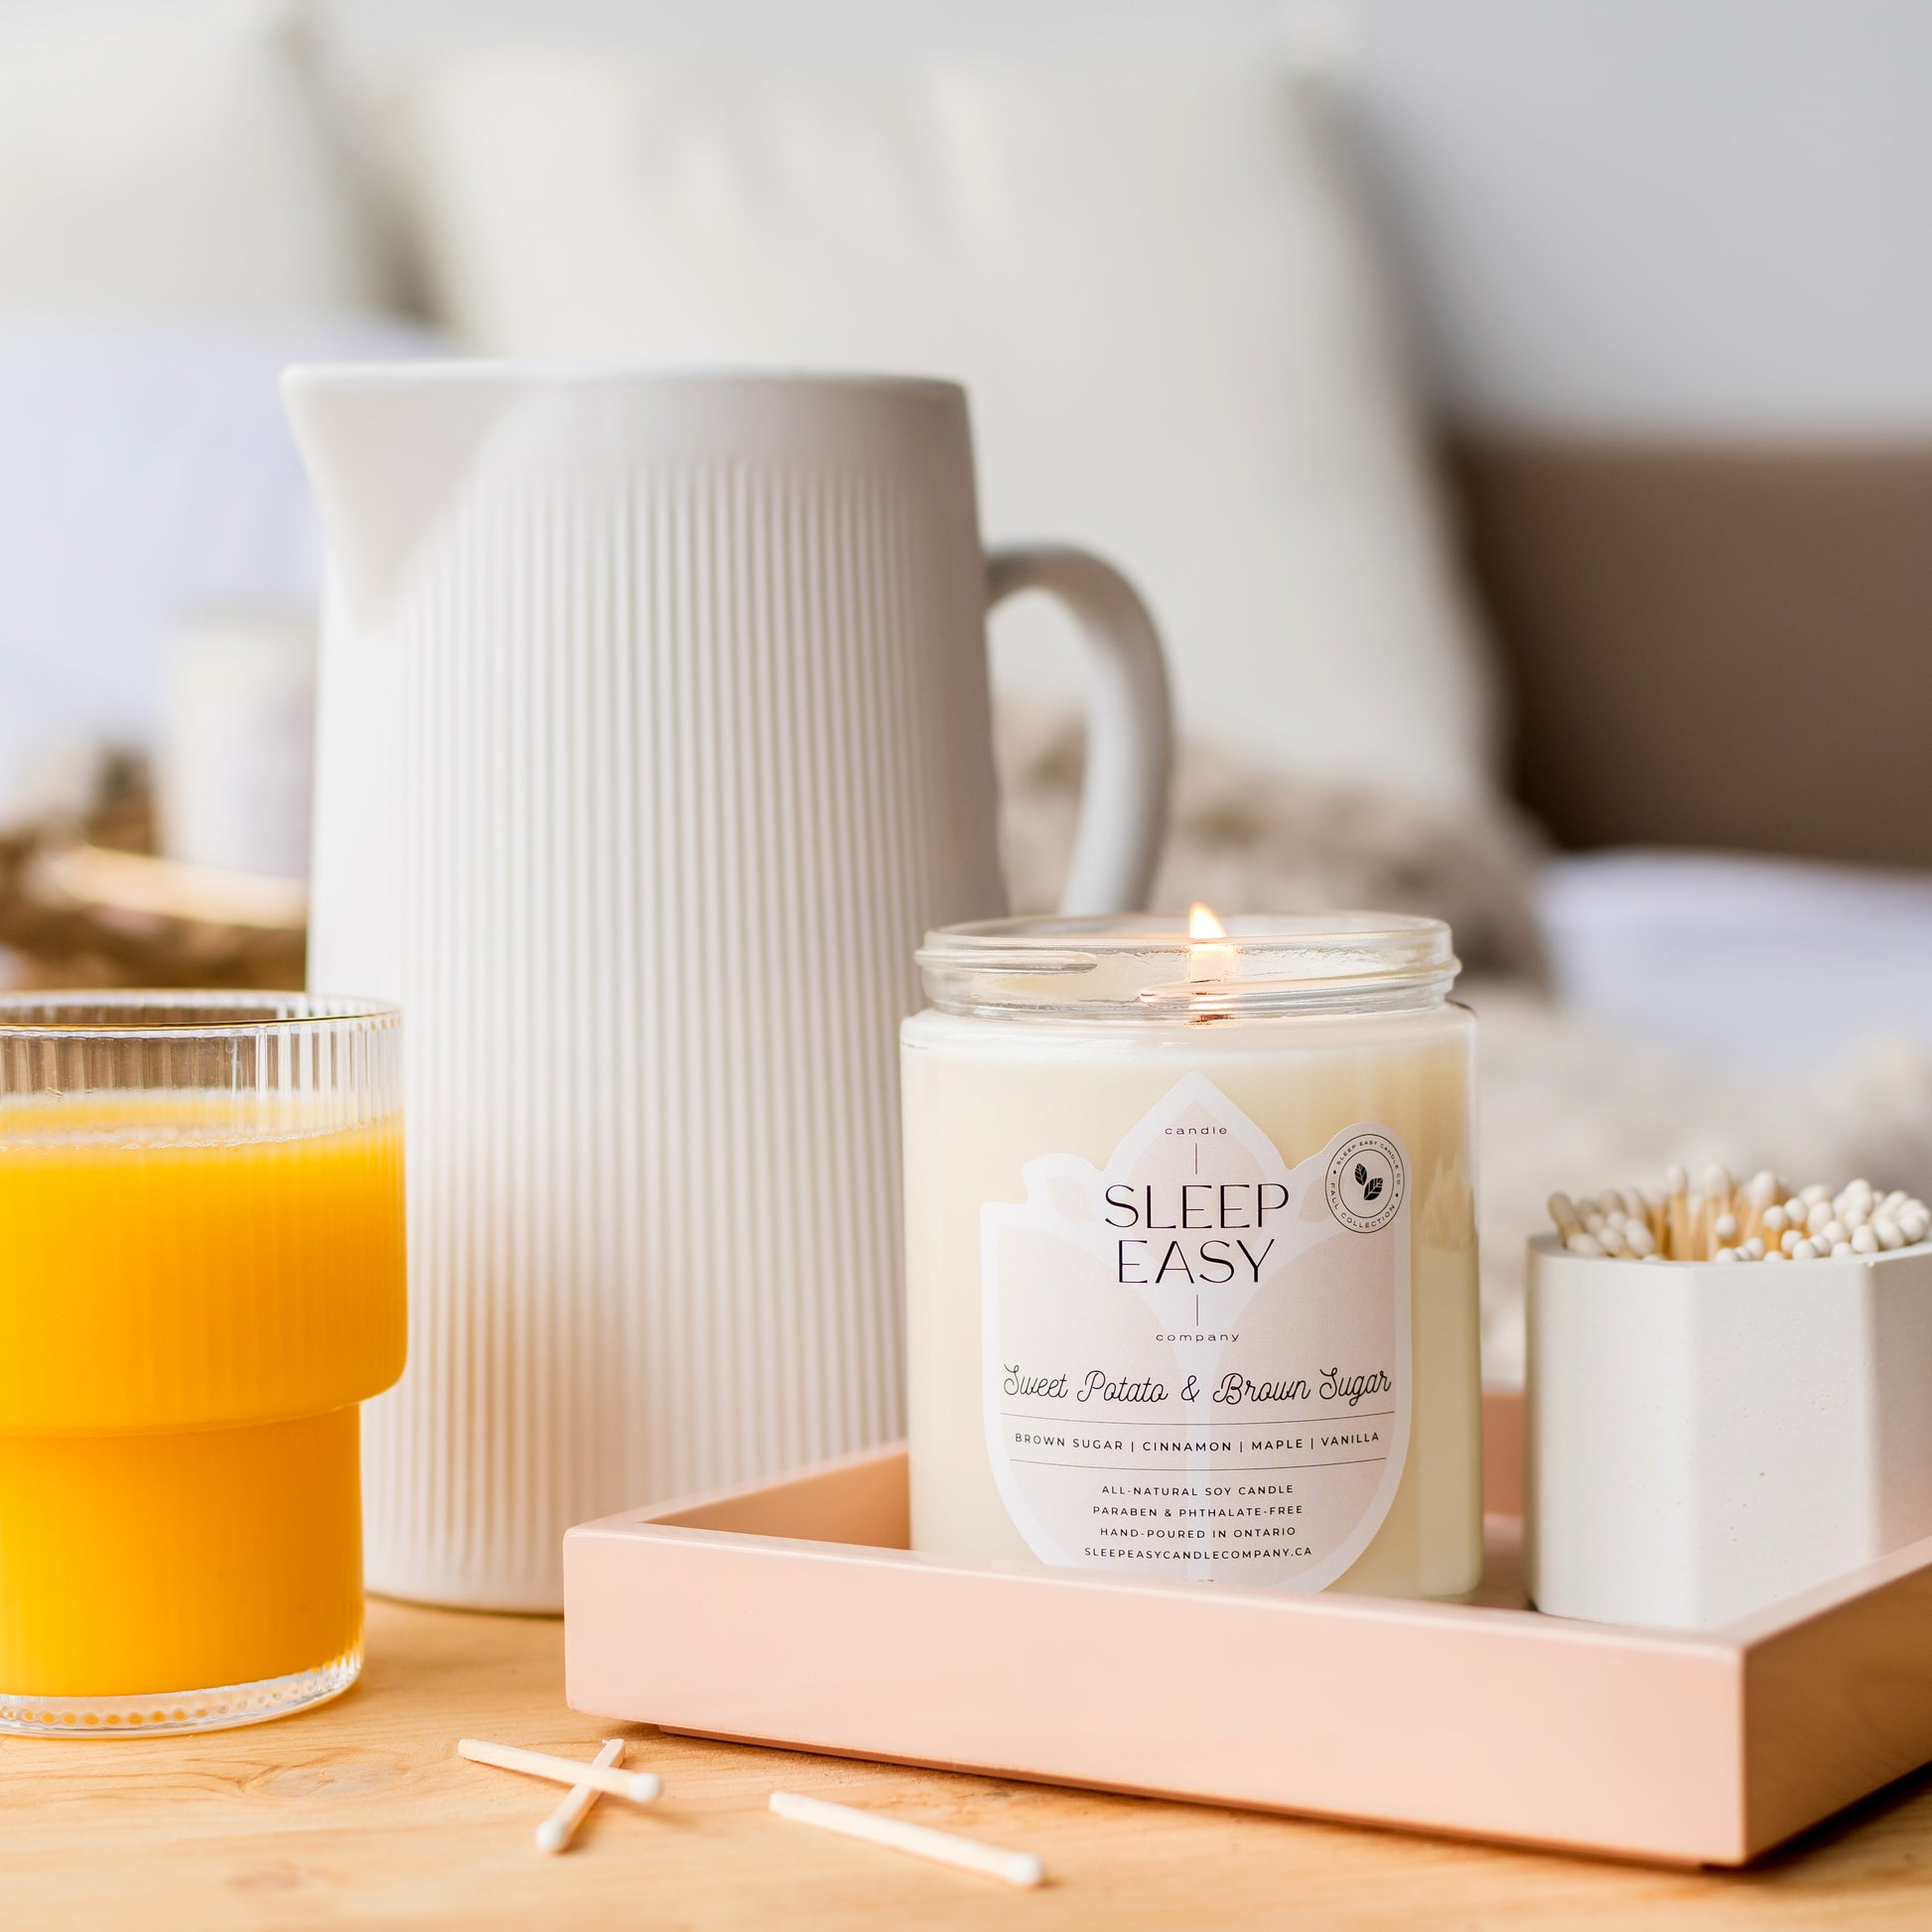 All natural soy candle is displayed on a pink tray with white matches on the side. The tray is on a bed of linen sheets and pillows. Orange juice is on the side of the tray. 